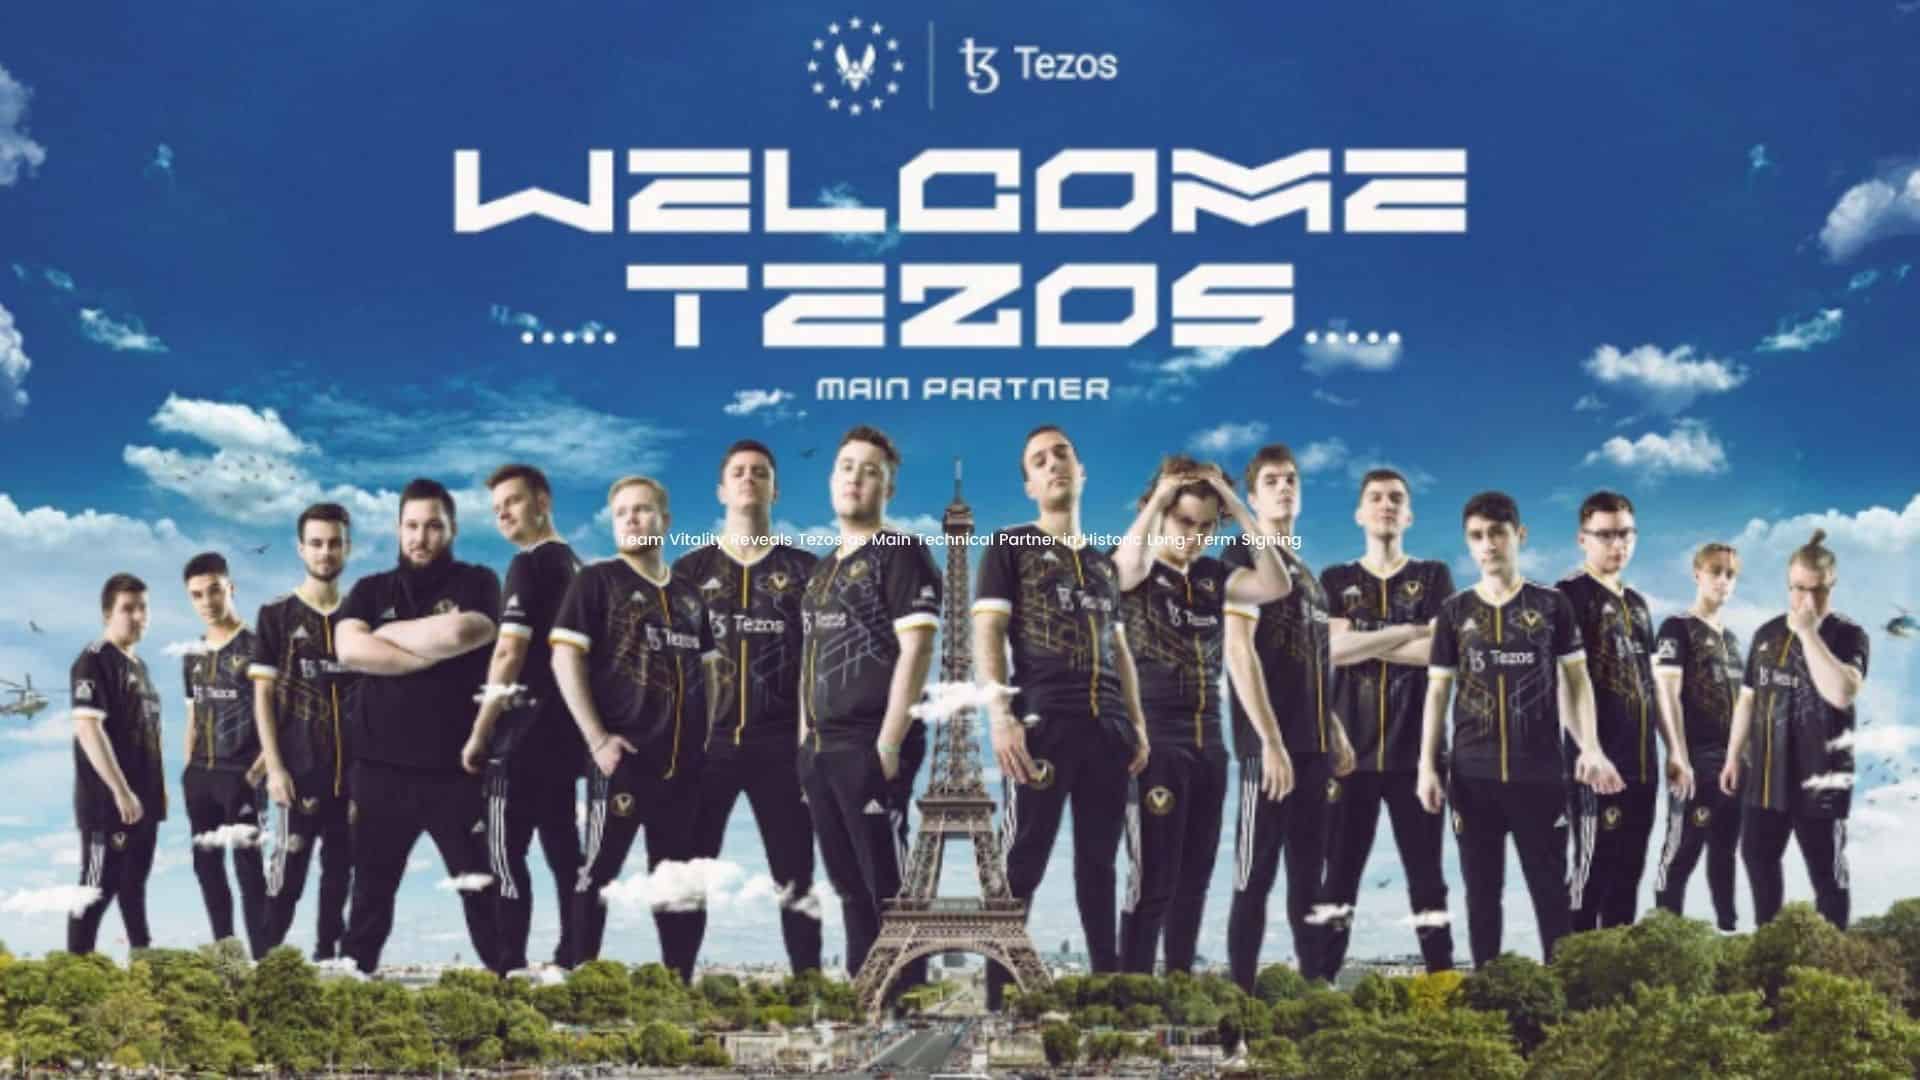 Team Vitality Reveals Tezos as Main Technical Partner in Historic Long Term Signing Paris, 06 January 2022: Team Vitality and Tezos, the world’s most advanced blockchain, are pleased to reveal a landmark technical partnership that will revolutionize the Team Vitality fan experience. Through the biggest partnership in Team Vitality history, the brands will unite to give the organization’s community world-first ways to engage with its star players, made possible by the pioneering and energy efficient open-source Tezos blockchain. 